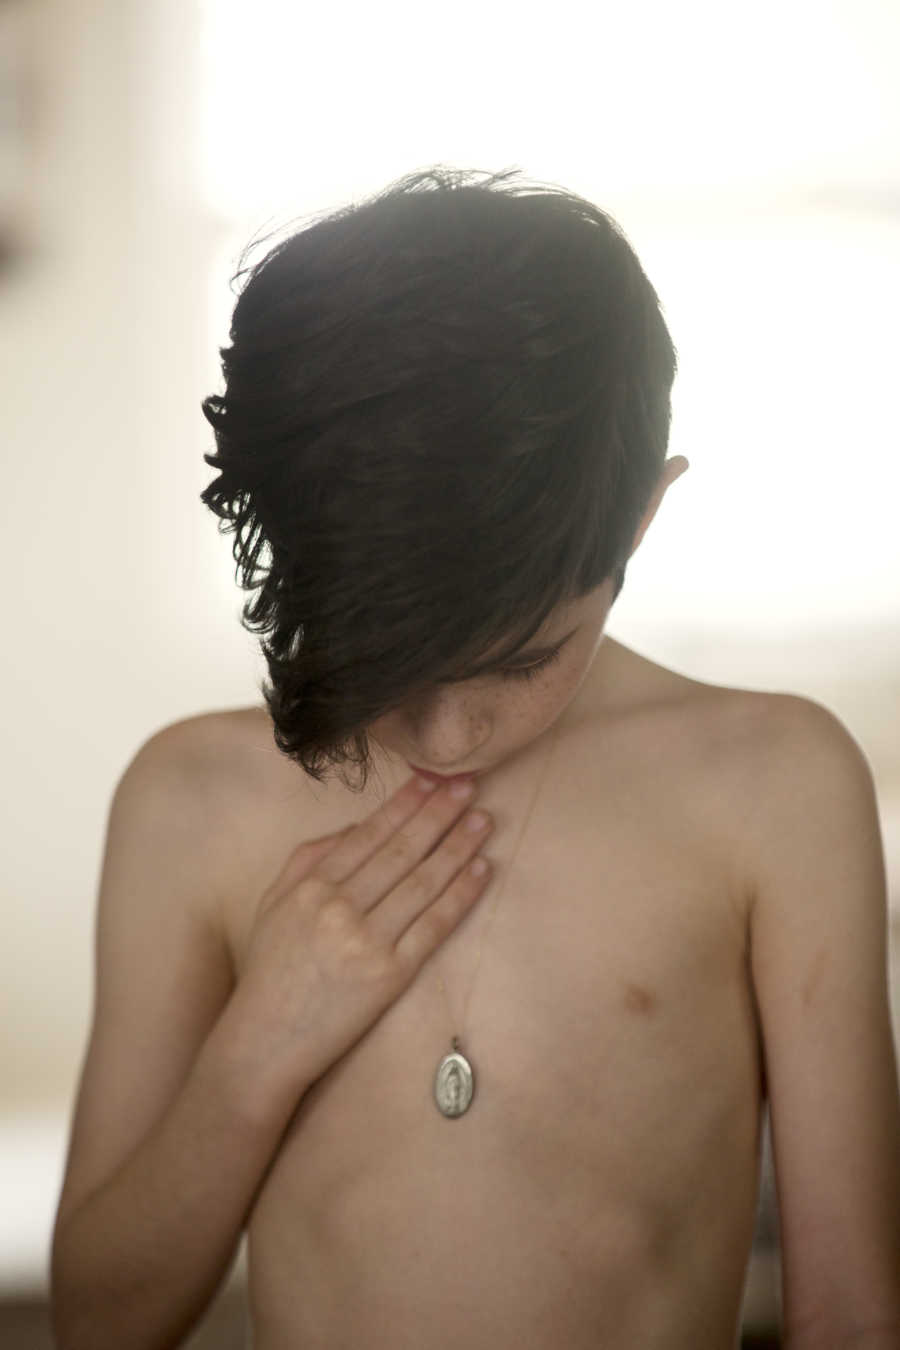 Boy whose father passed away looks down at angel necklace around his neck